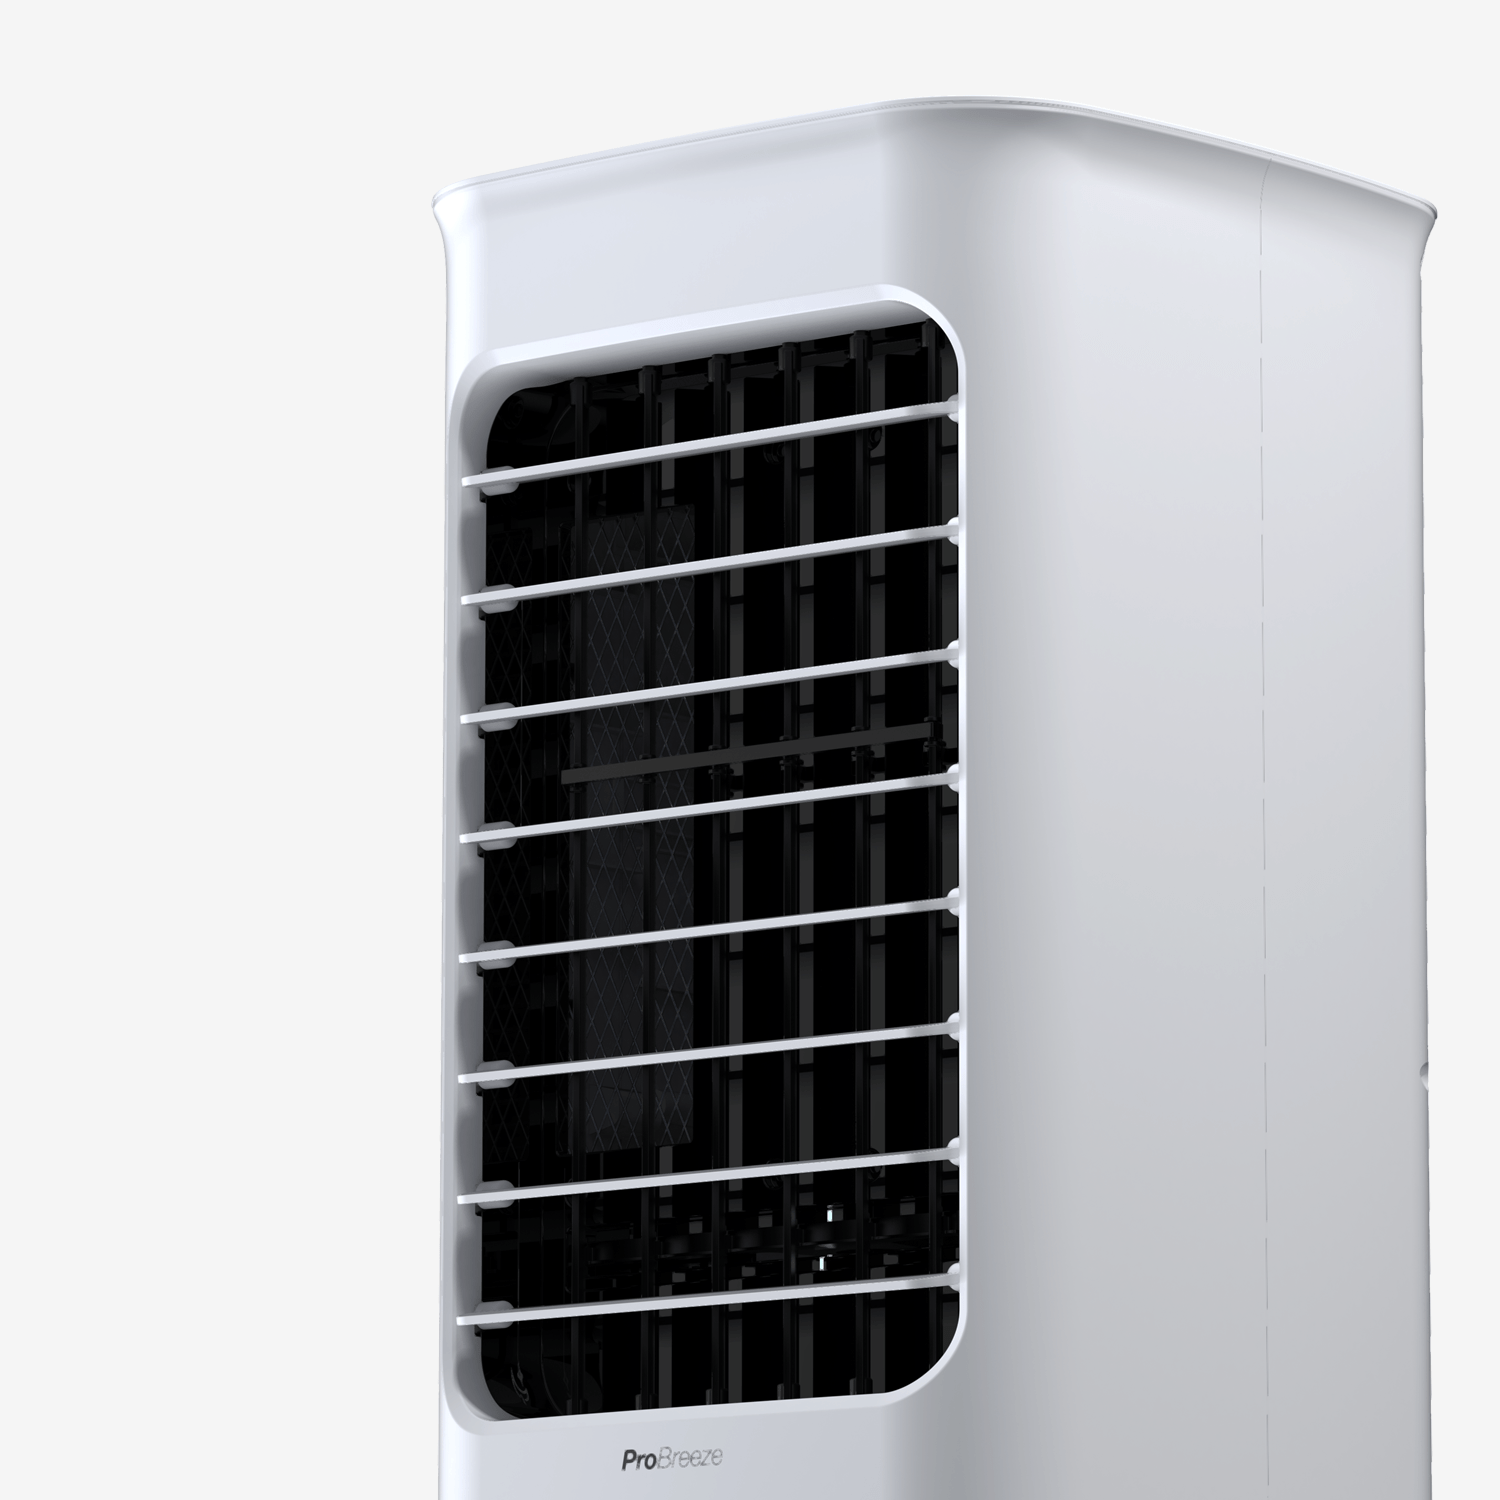  Pro Breeze Evaporative Air Cooler for Room Cooling Fan - 3-in-1  Air Cooler Portable with 6 QTS Tank, 70° Oscillation & 7hr Timer - Portable  Swamp Cooler with Remote Control : Home & Kitchen